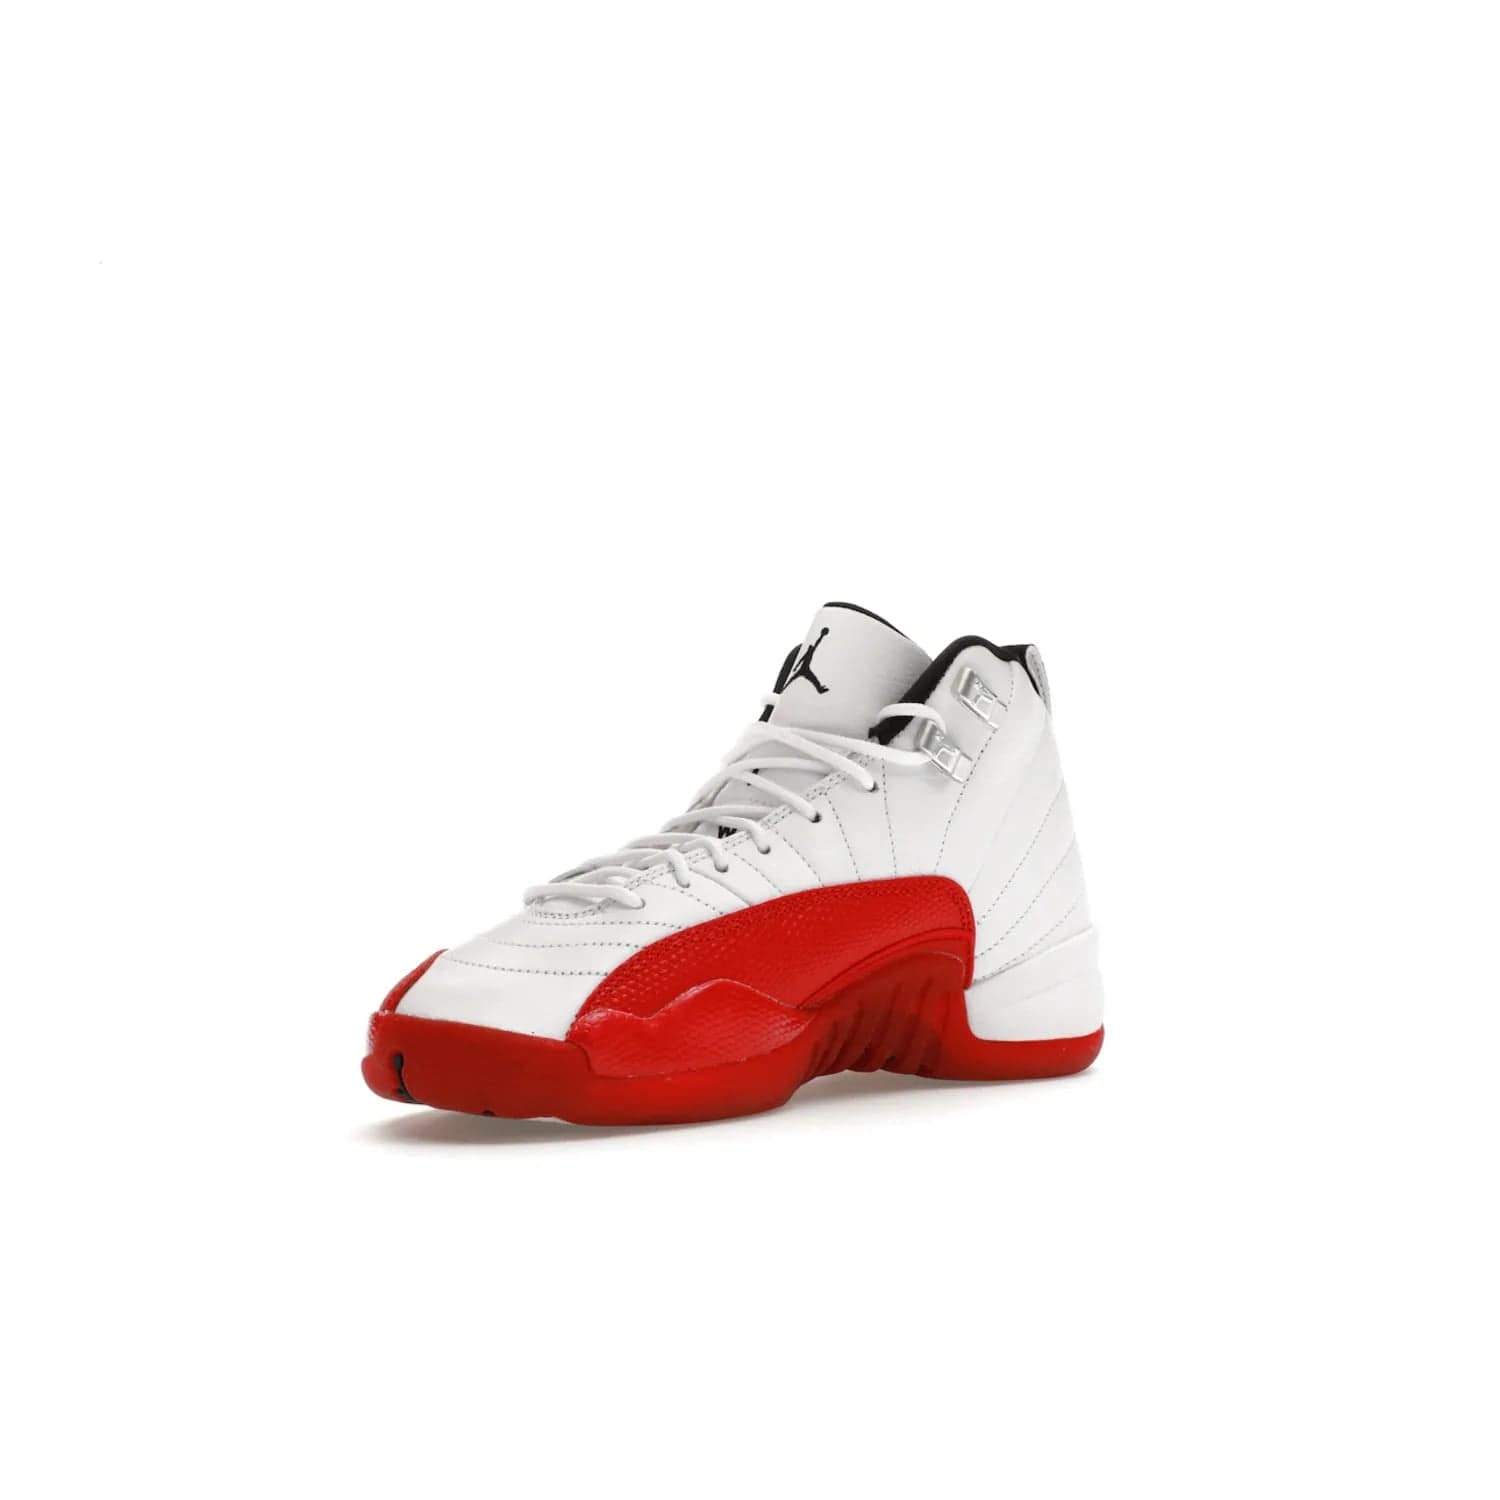 Jordan 12 Retro Cherry (2023) (GS) - Image 15 - Only at www.BallersClubKickz.com - Grab the Jordan 12 Retro Cherry (2023) (GS) and show off your signature style with these iconic kicks. Dressed in White, Black and Varsity Red, these timeless kicks are sure to turn heads. Available October 28, 2023.